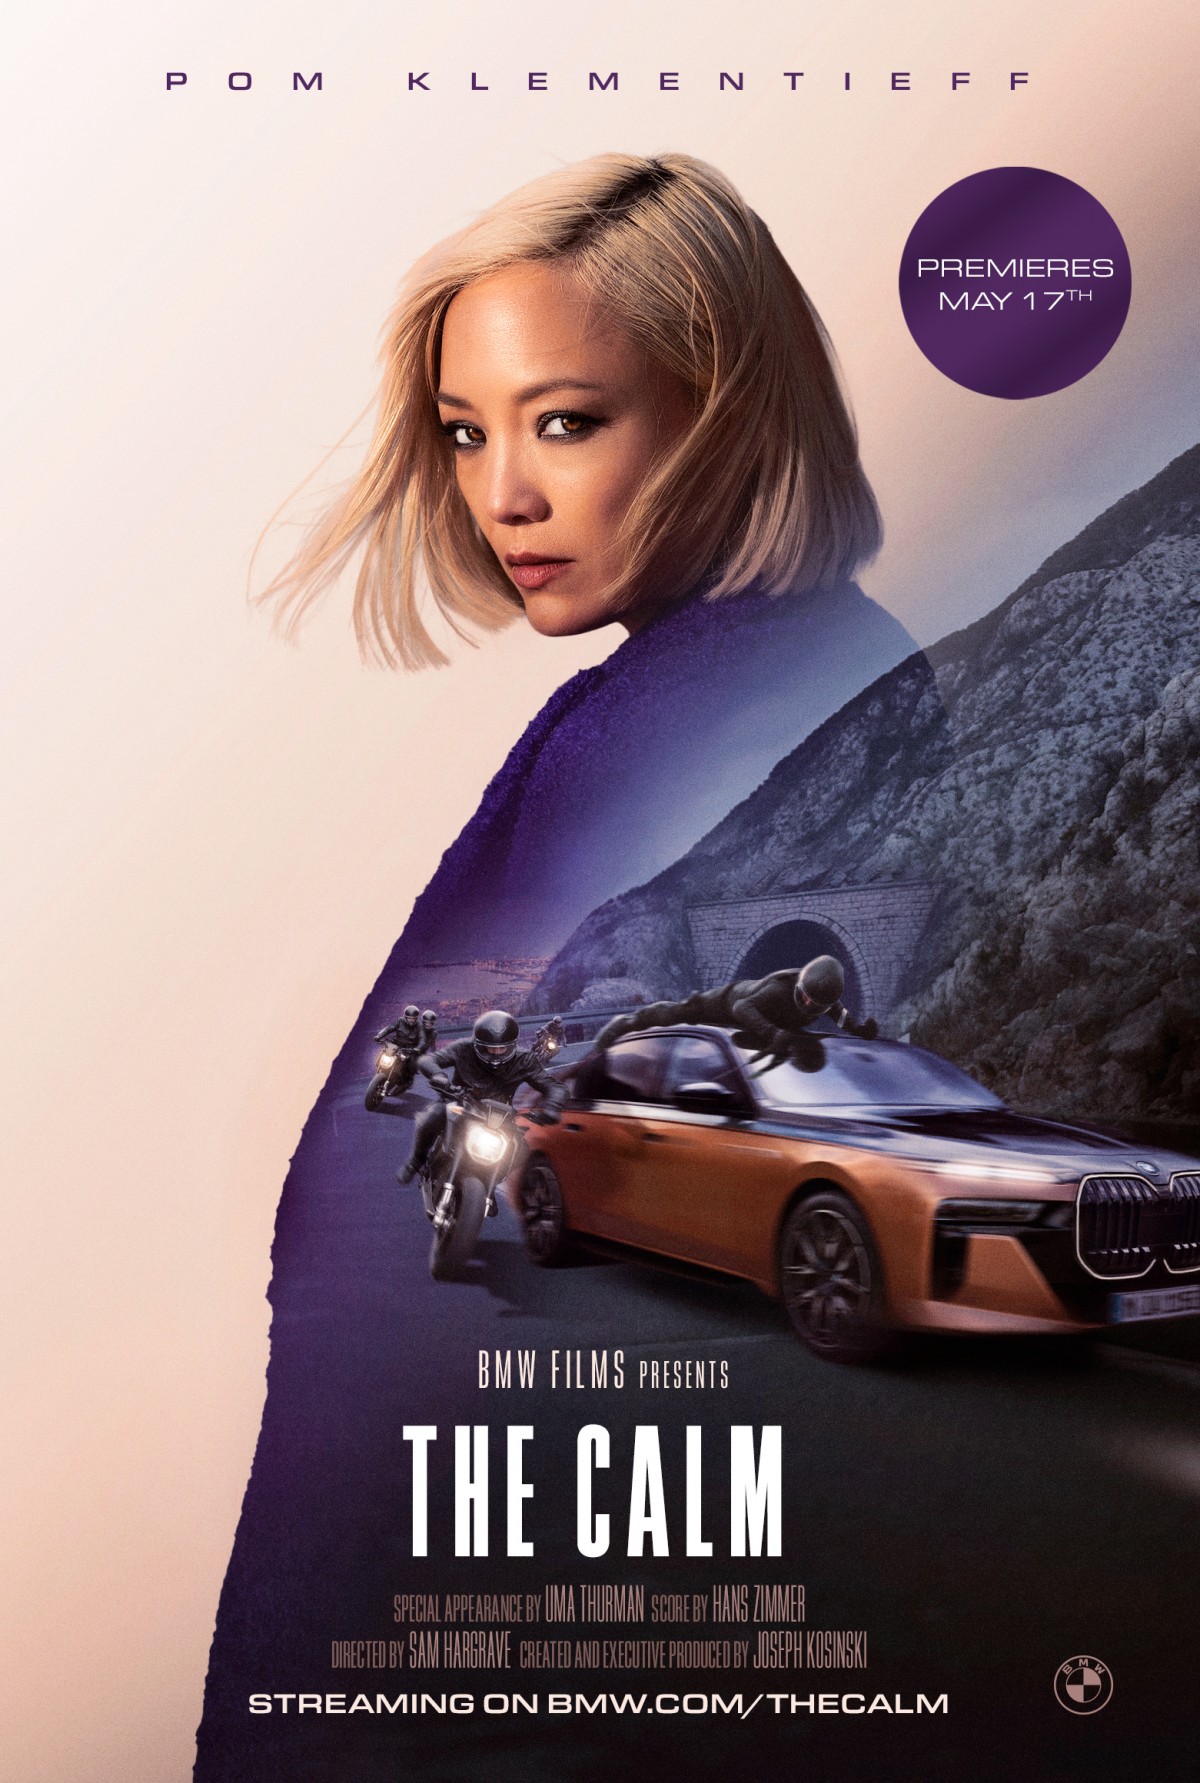 BMW Films presents The Calm - world’s first movie to premiere in a car